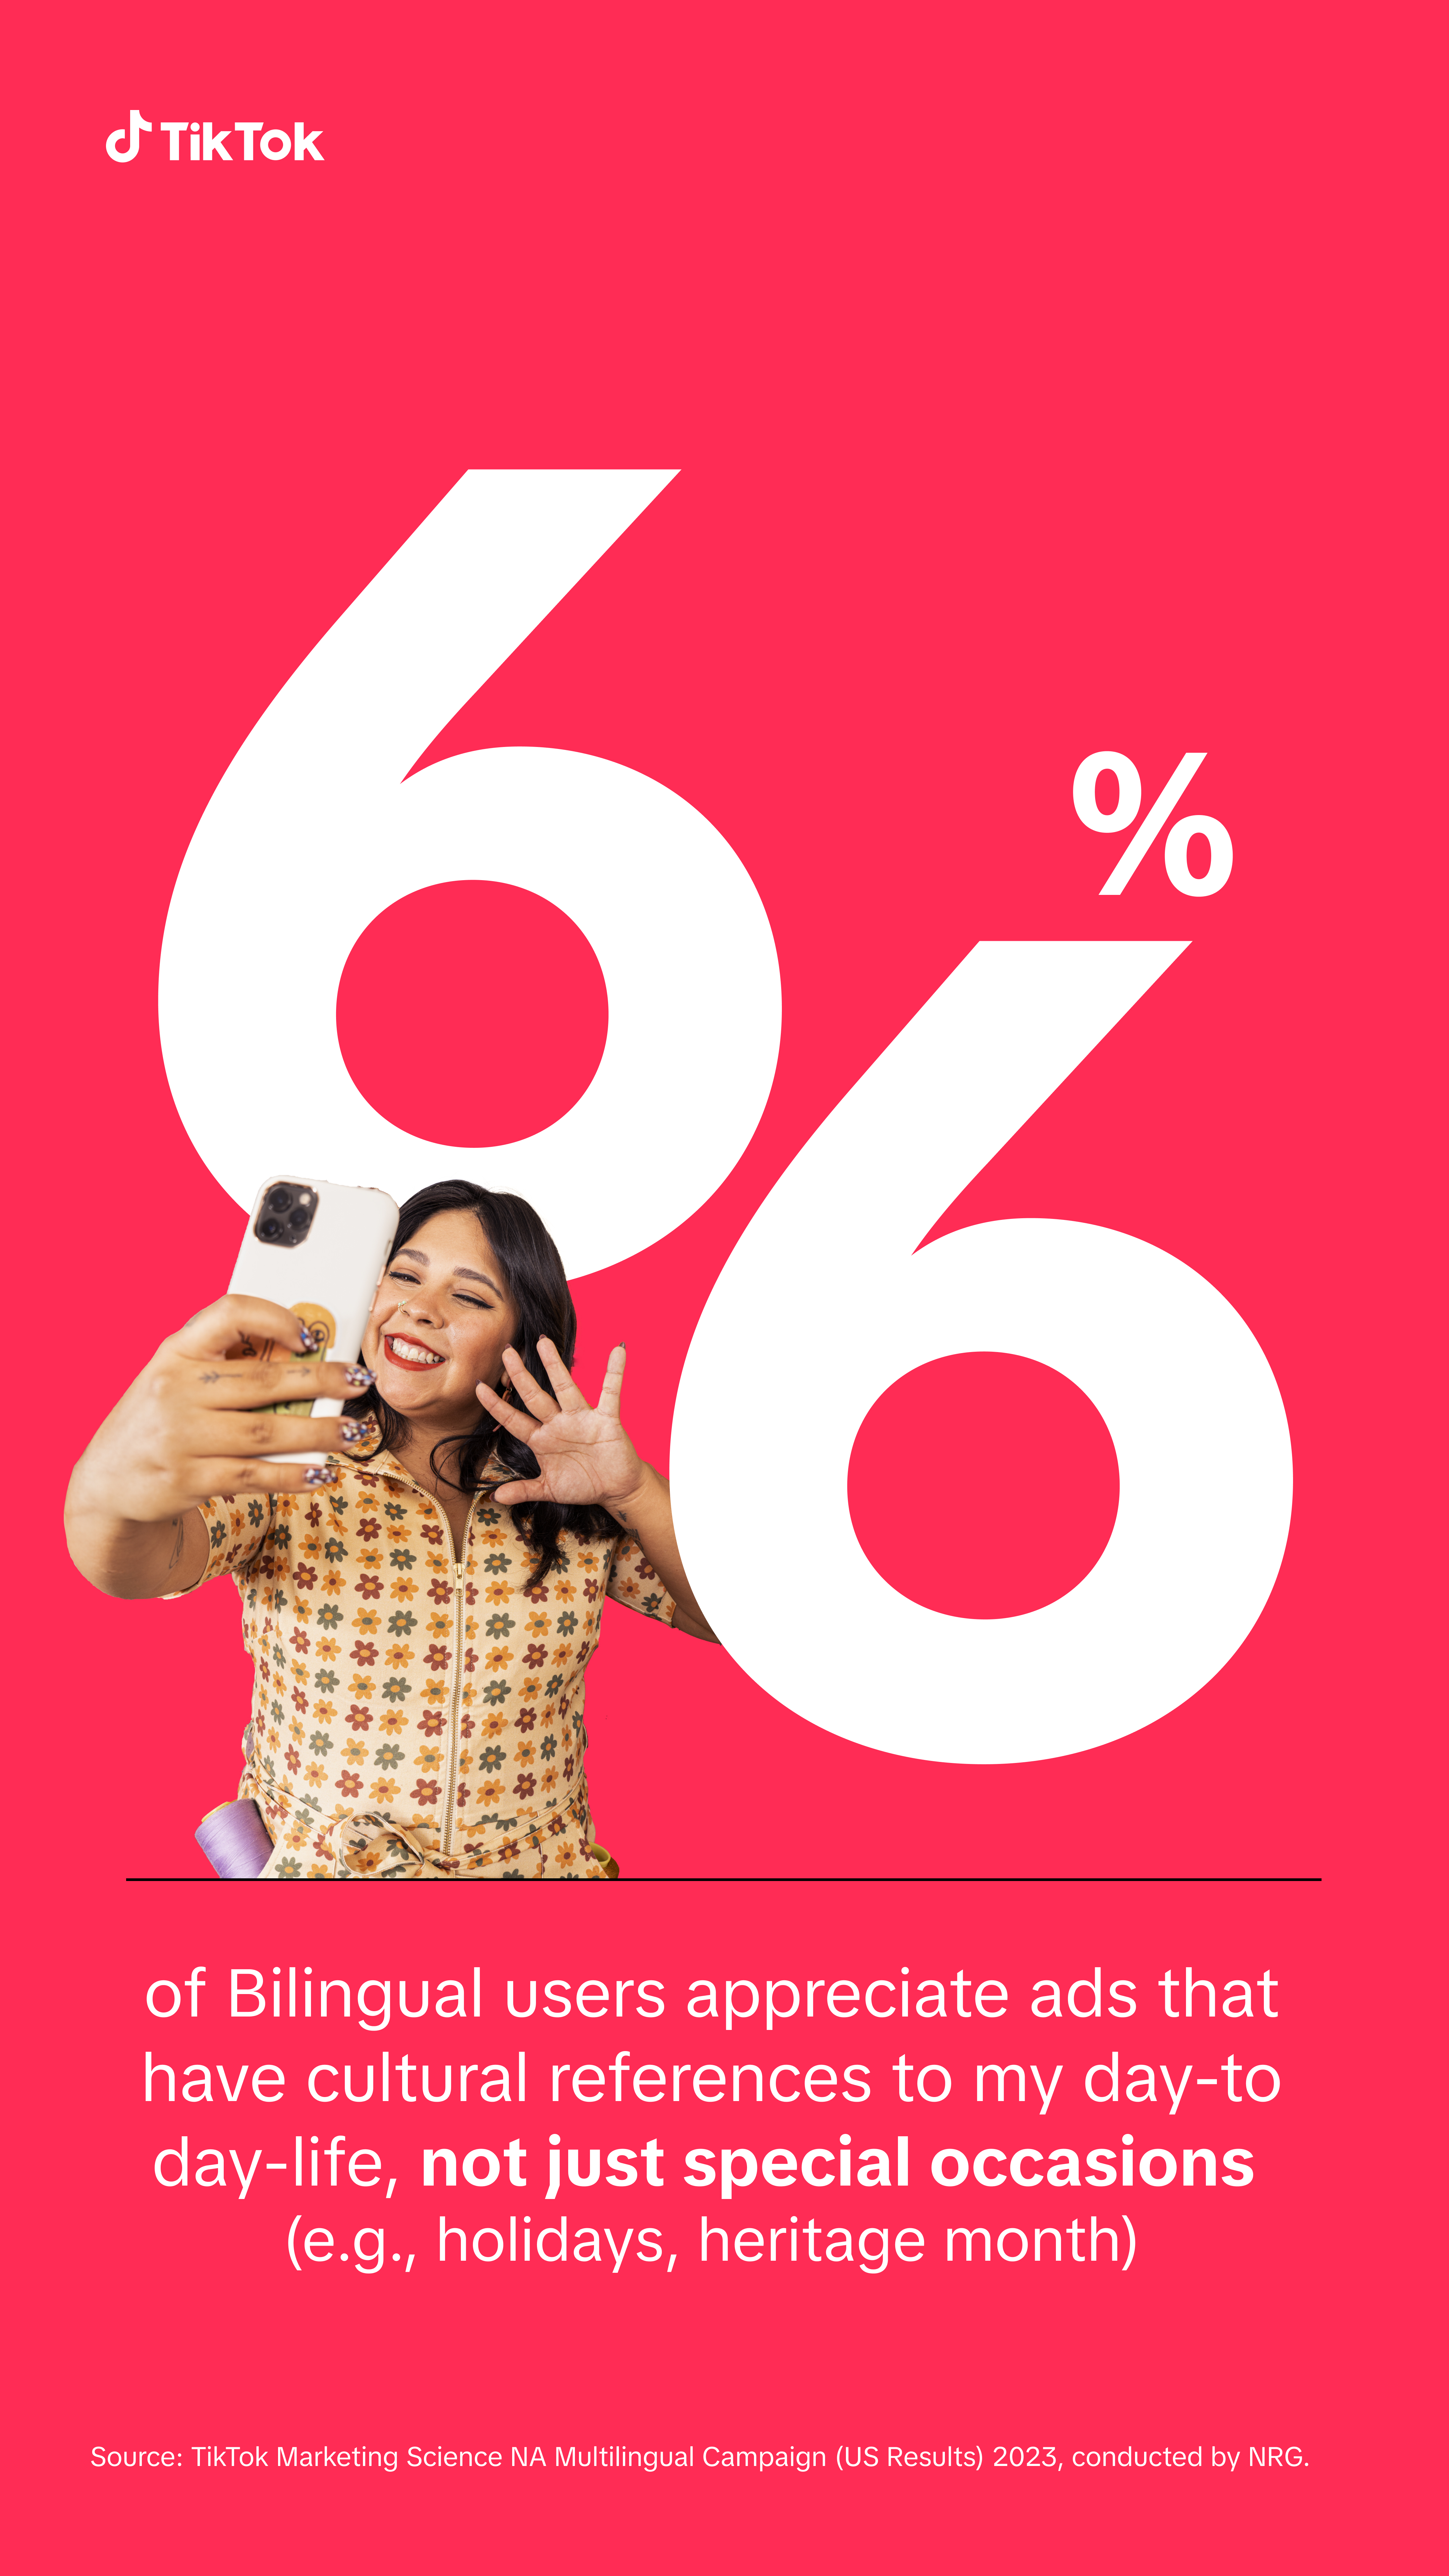 66% of bilingual users appreciate ads that have cultural references to day-to-day life, not just special occasions